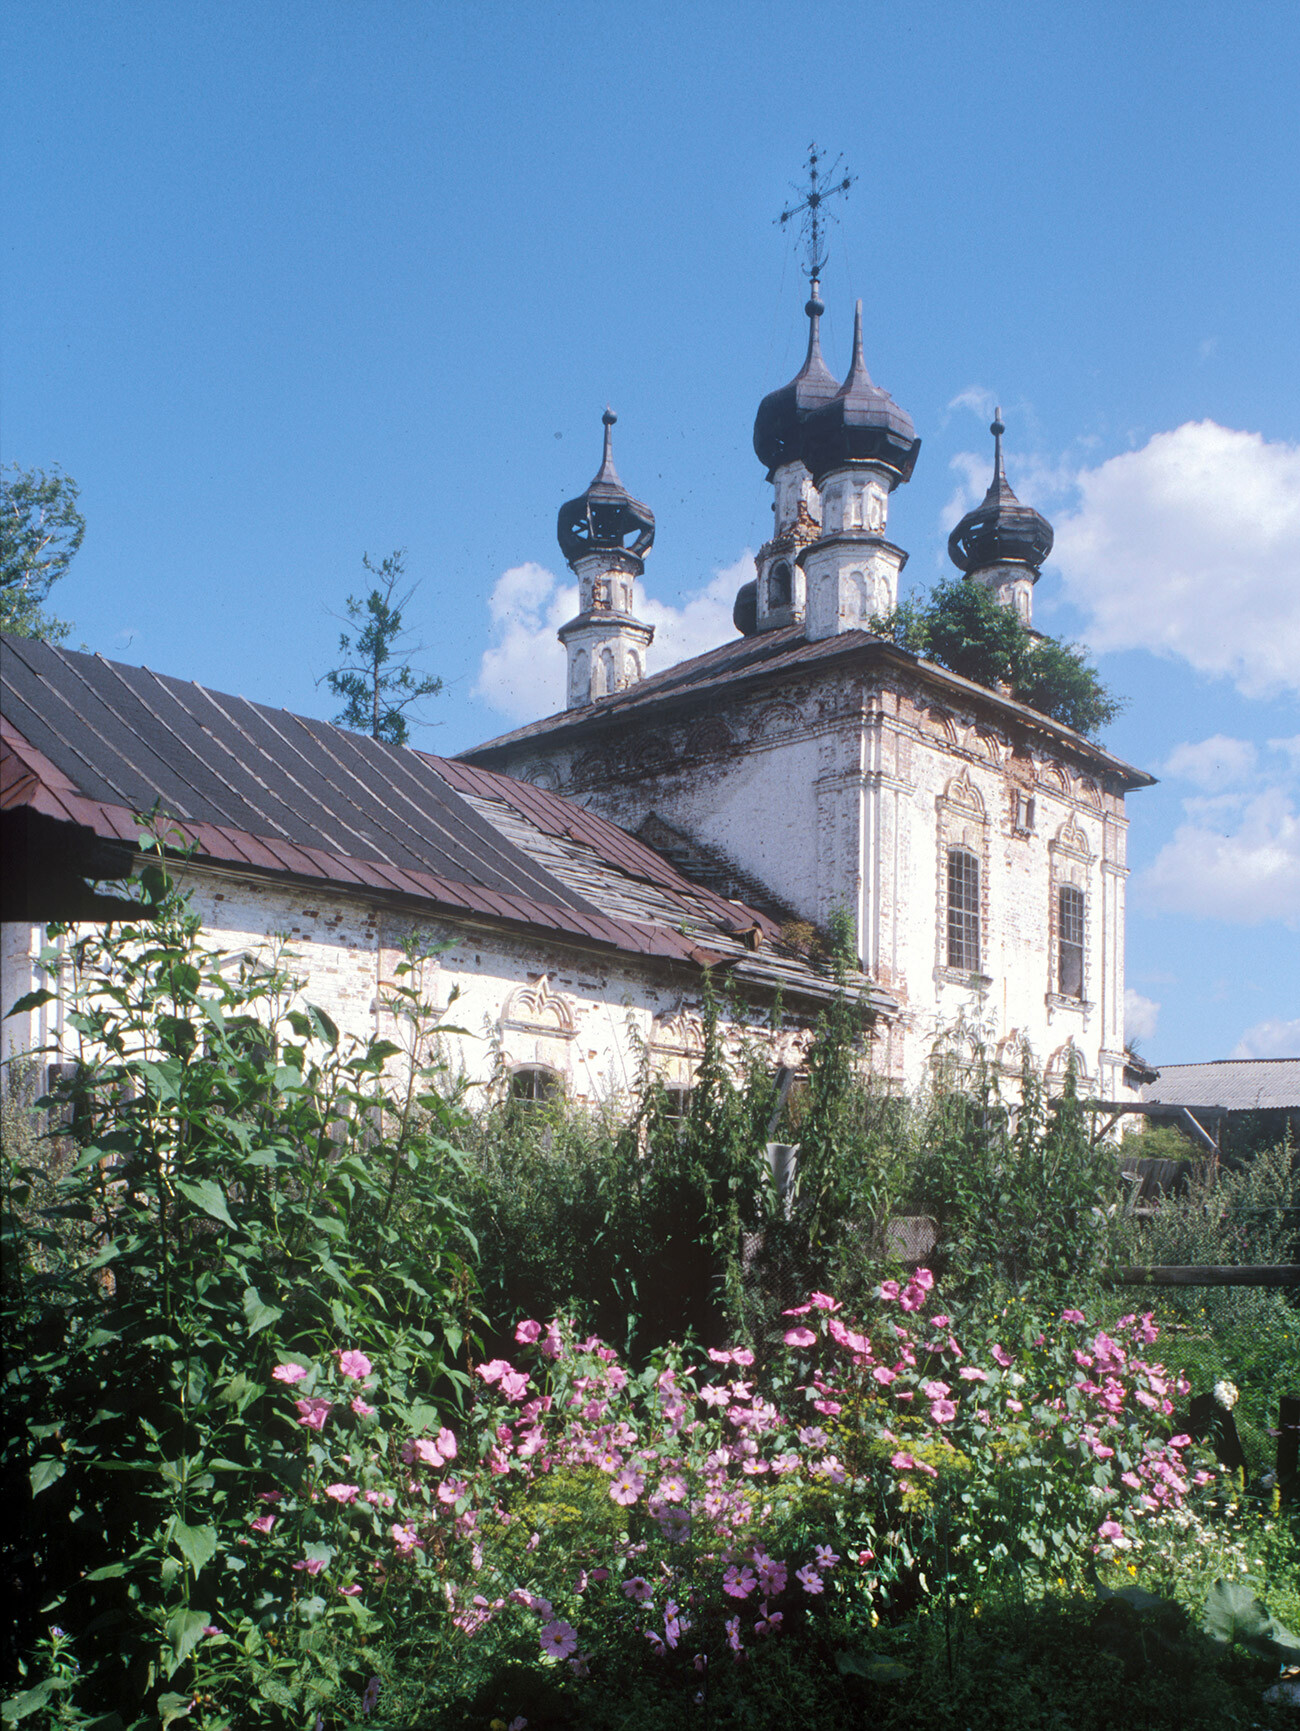 Church of the Intercession of the Virgin (also Nativity of Christ). Built in 1780 on left bank of Mologa River. August 12, 2006